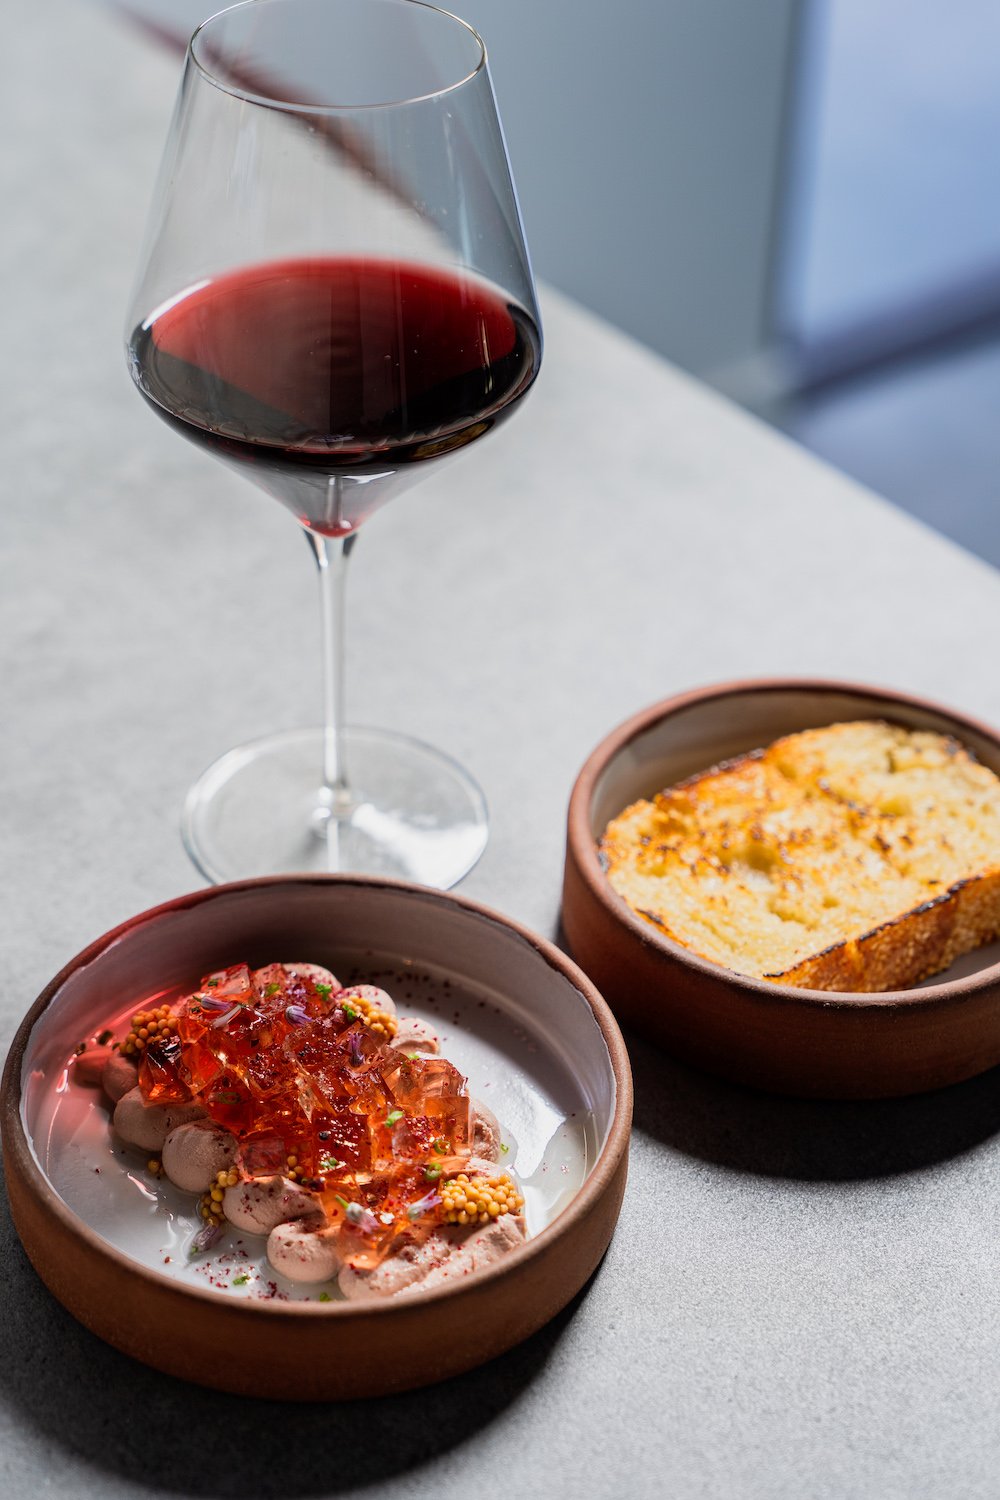 A seafood dish, bread, and wine from Hillcrest winebar and restaurant Cellar Hand